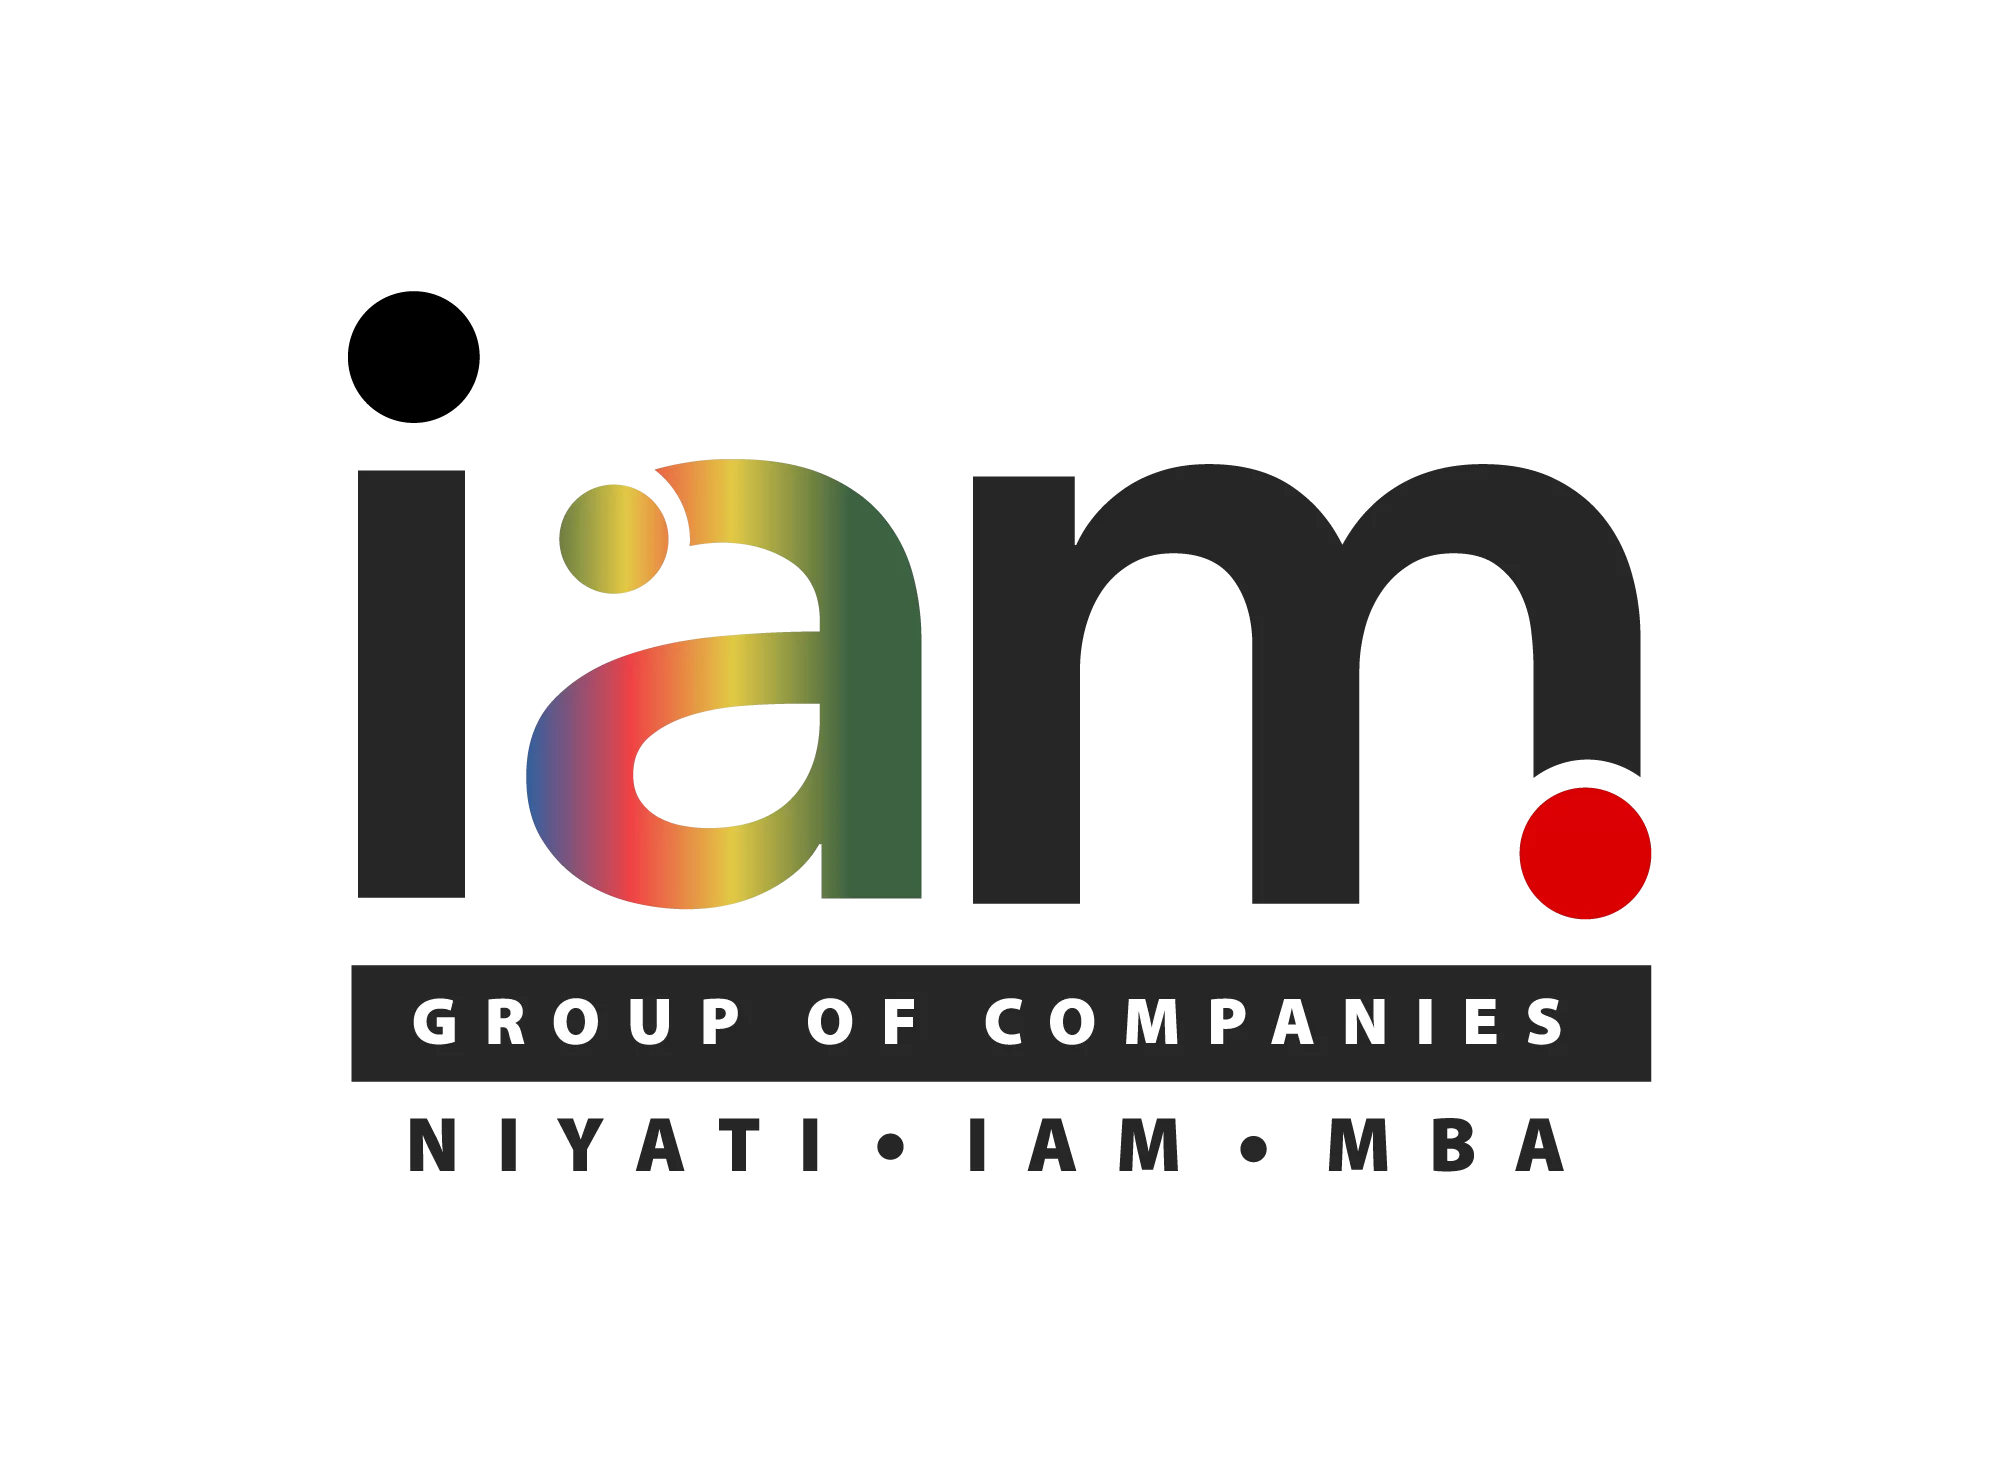 IAM Group of Companies|IT Services|Professional Services